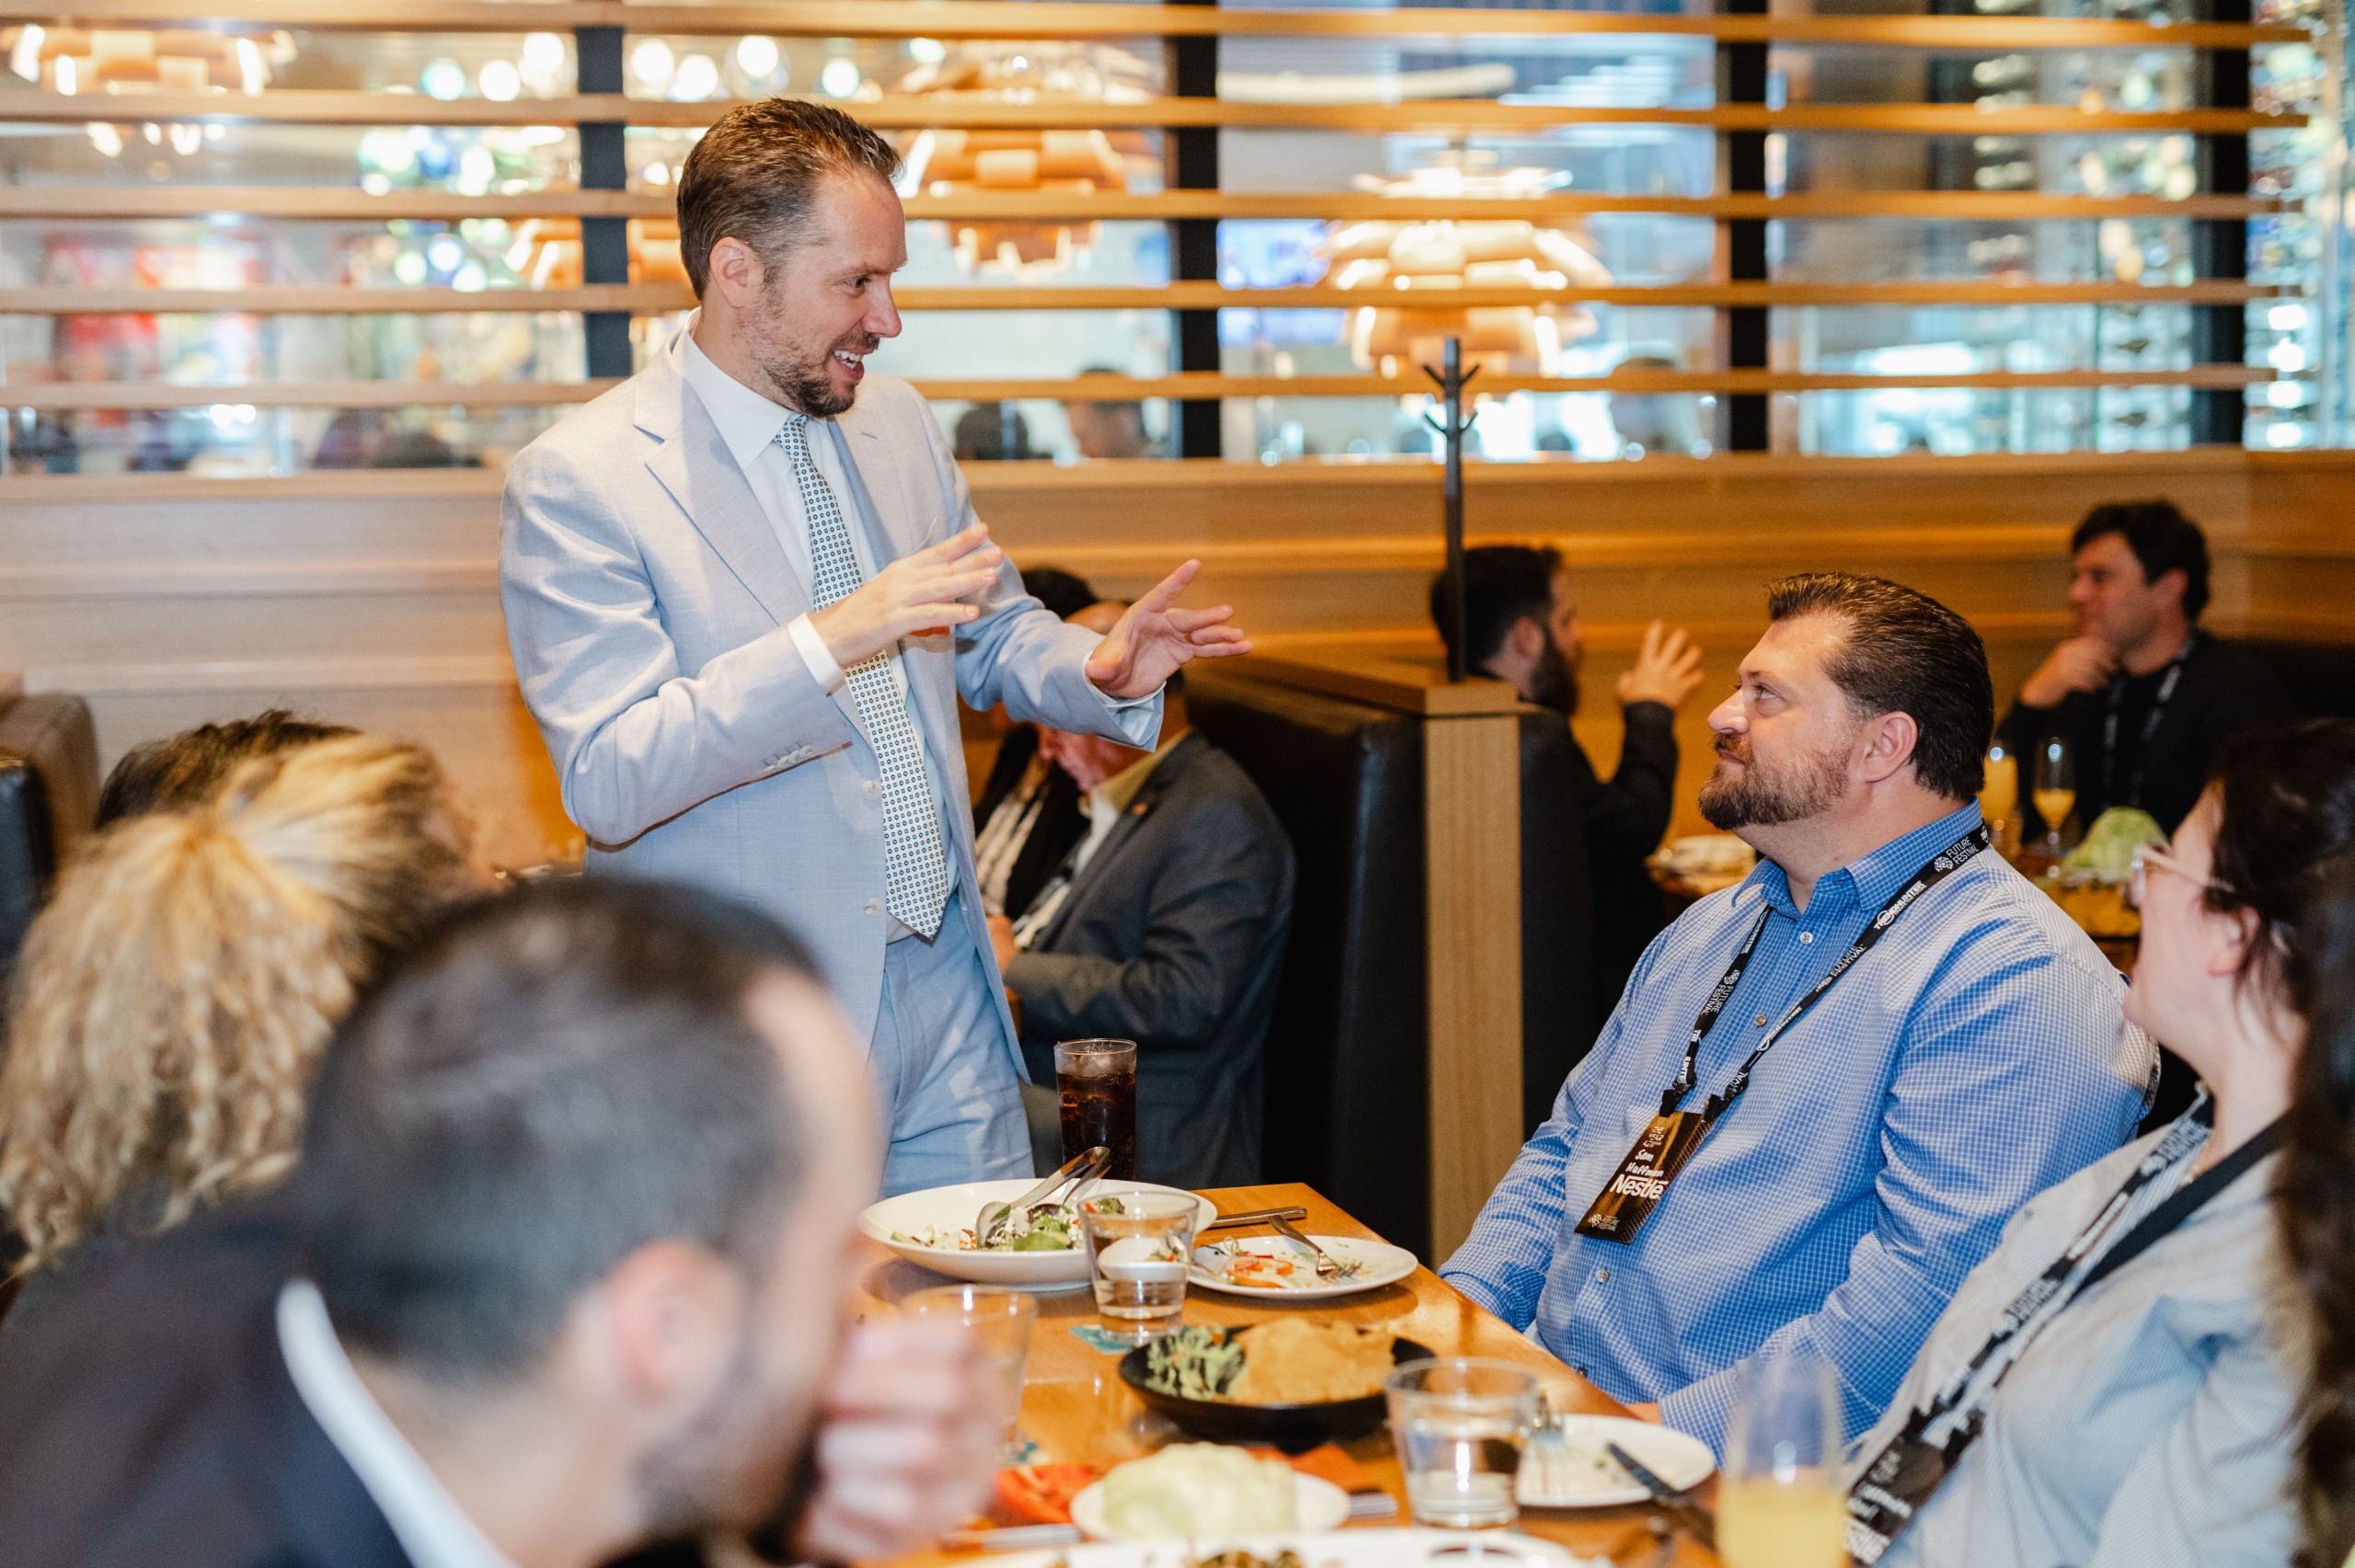 A man delivering a speech to a group of people at a restaurant, captured through event photography.